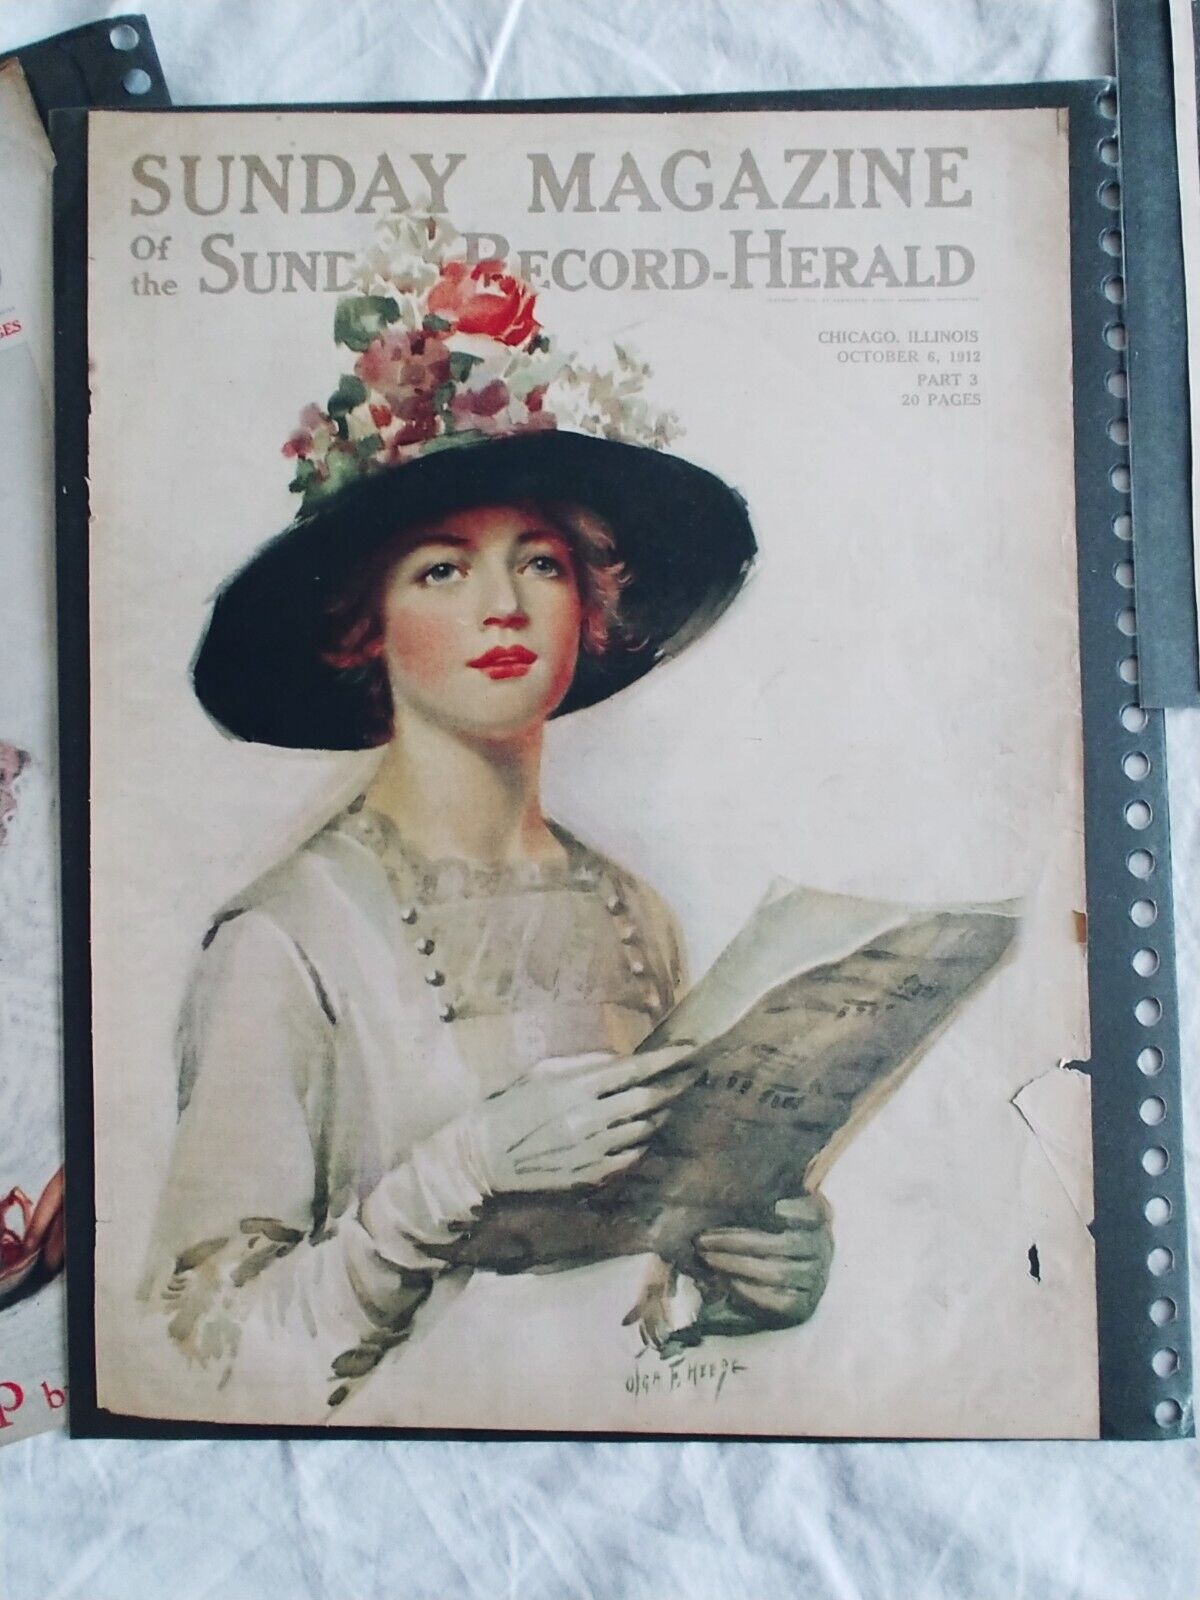 Lot of 4 CHICAGO SUNDAY RECORD-HERALD MAGAZINE Covers 1909-1913; LESTER RALPH